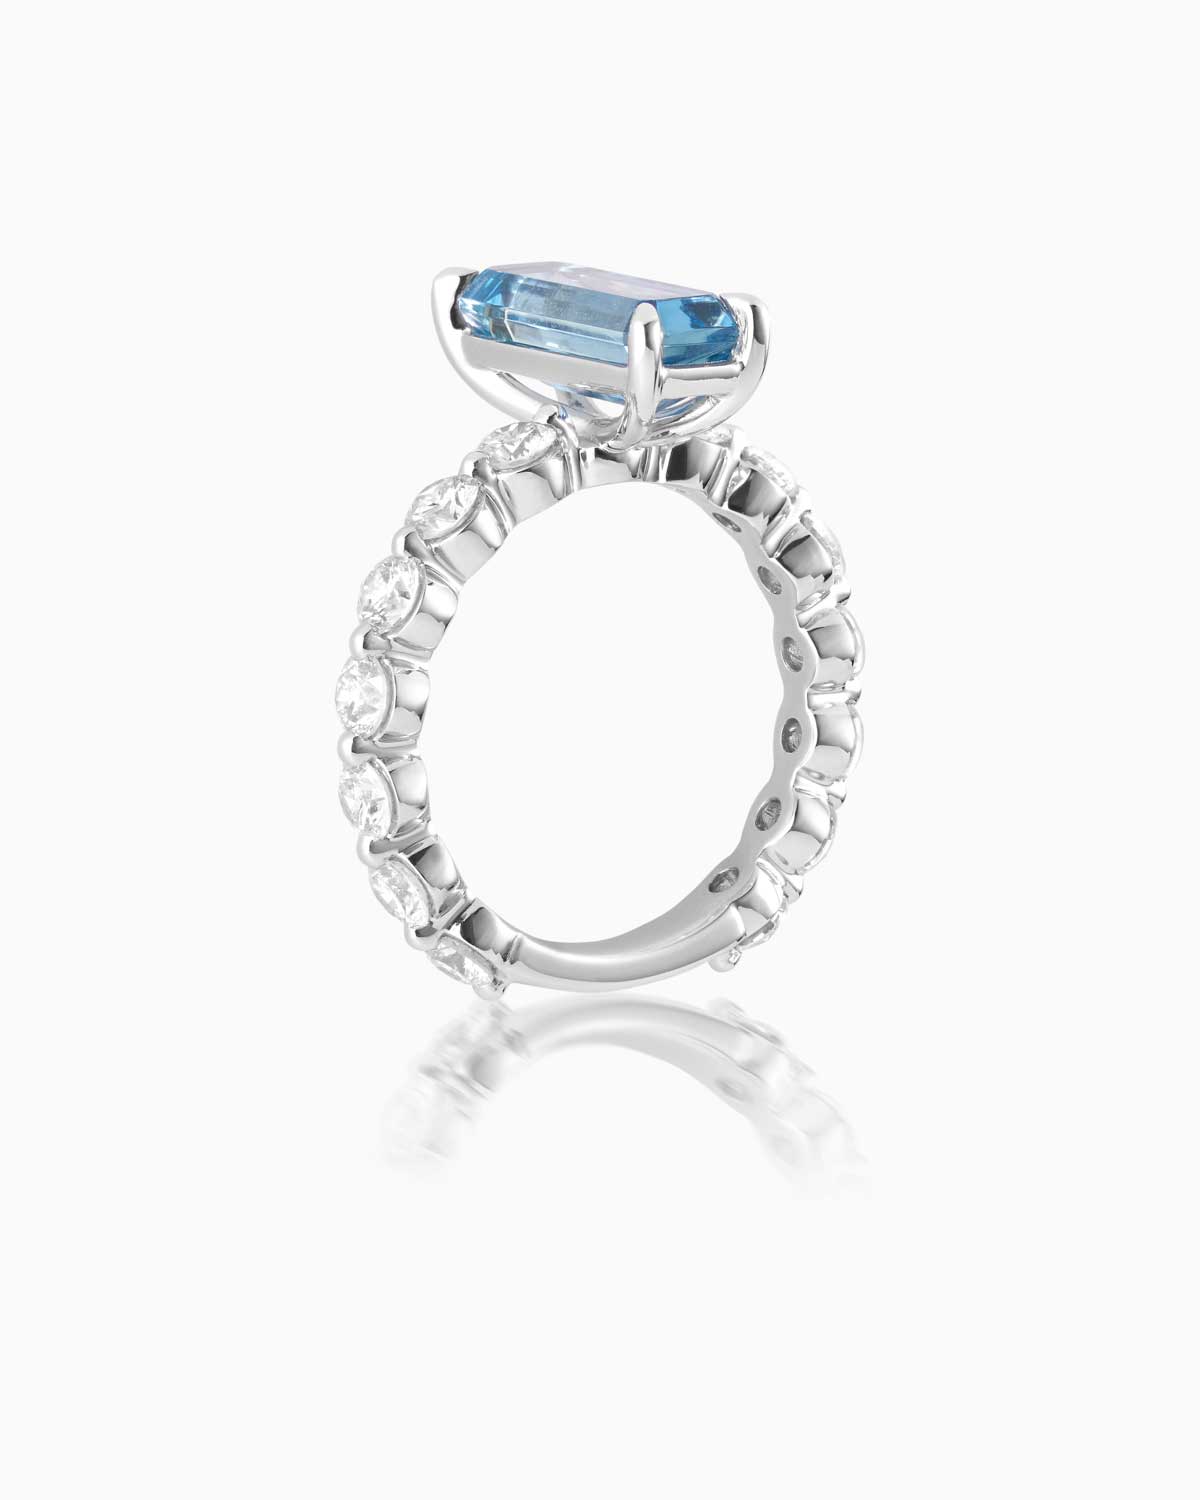 Elongated 2.55ct aquamarine and diamond ring on a platinum band by claude and me jewellery